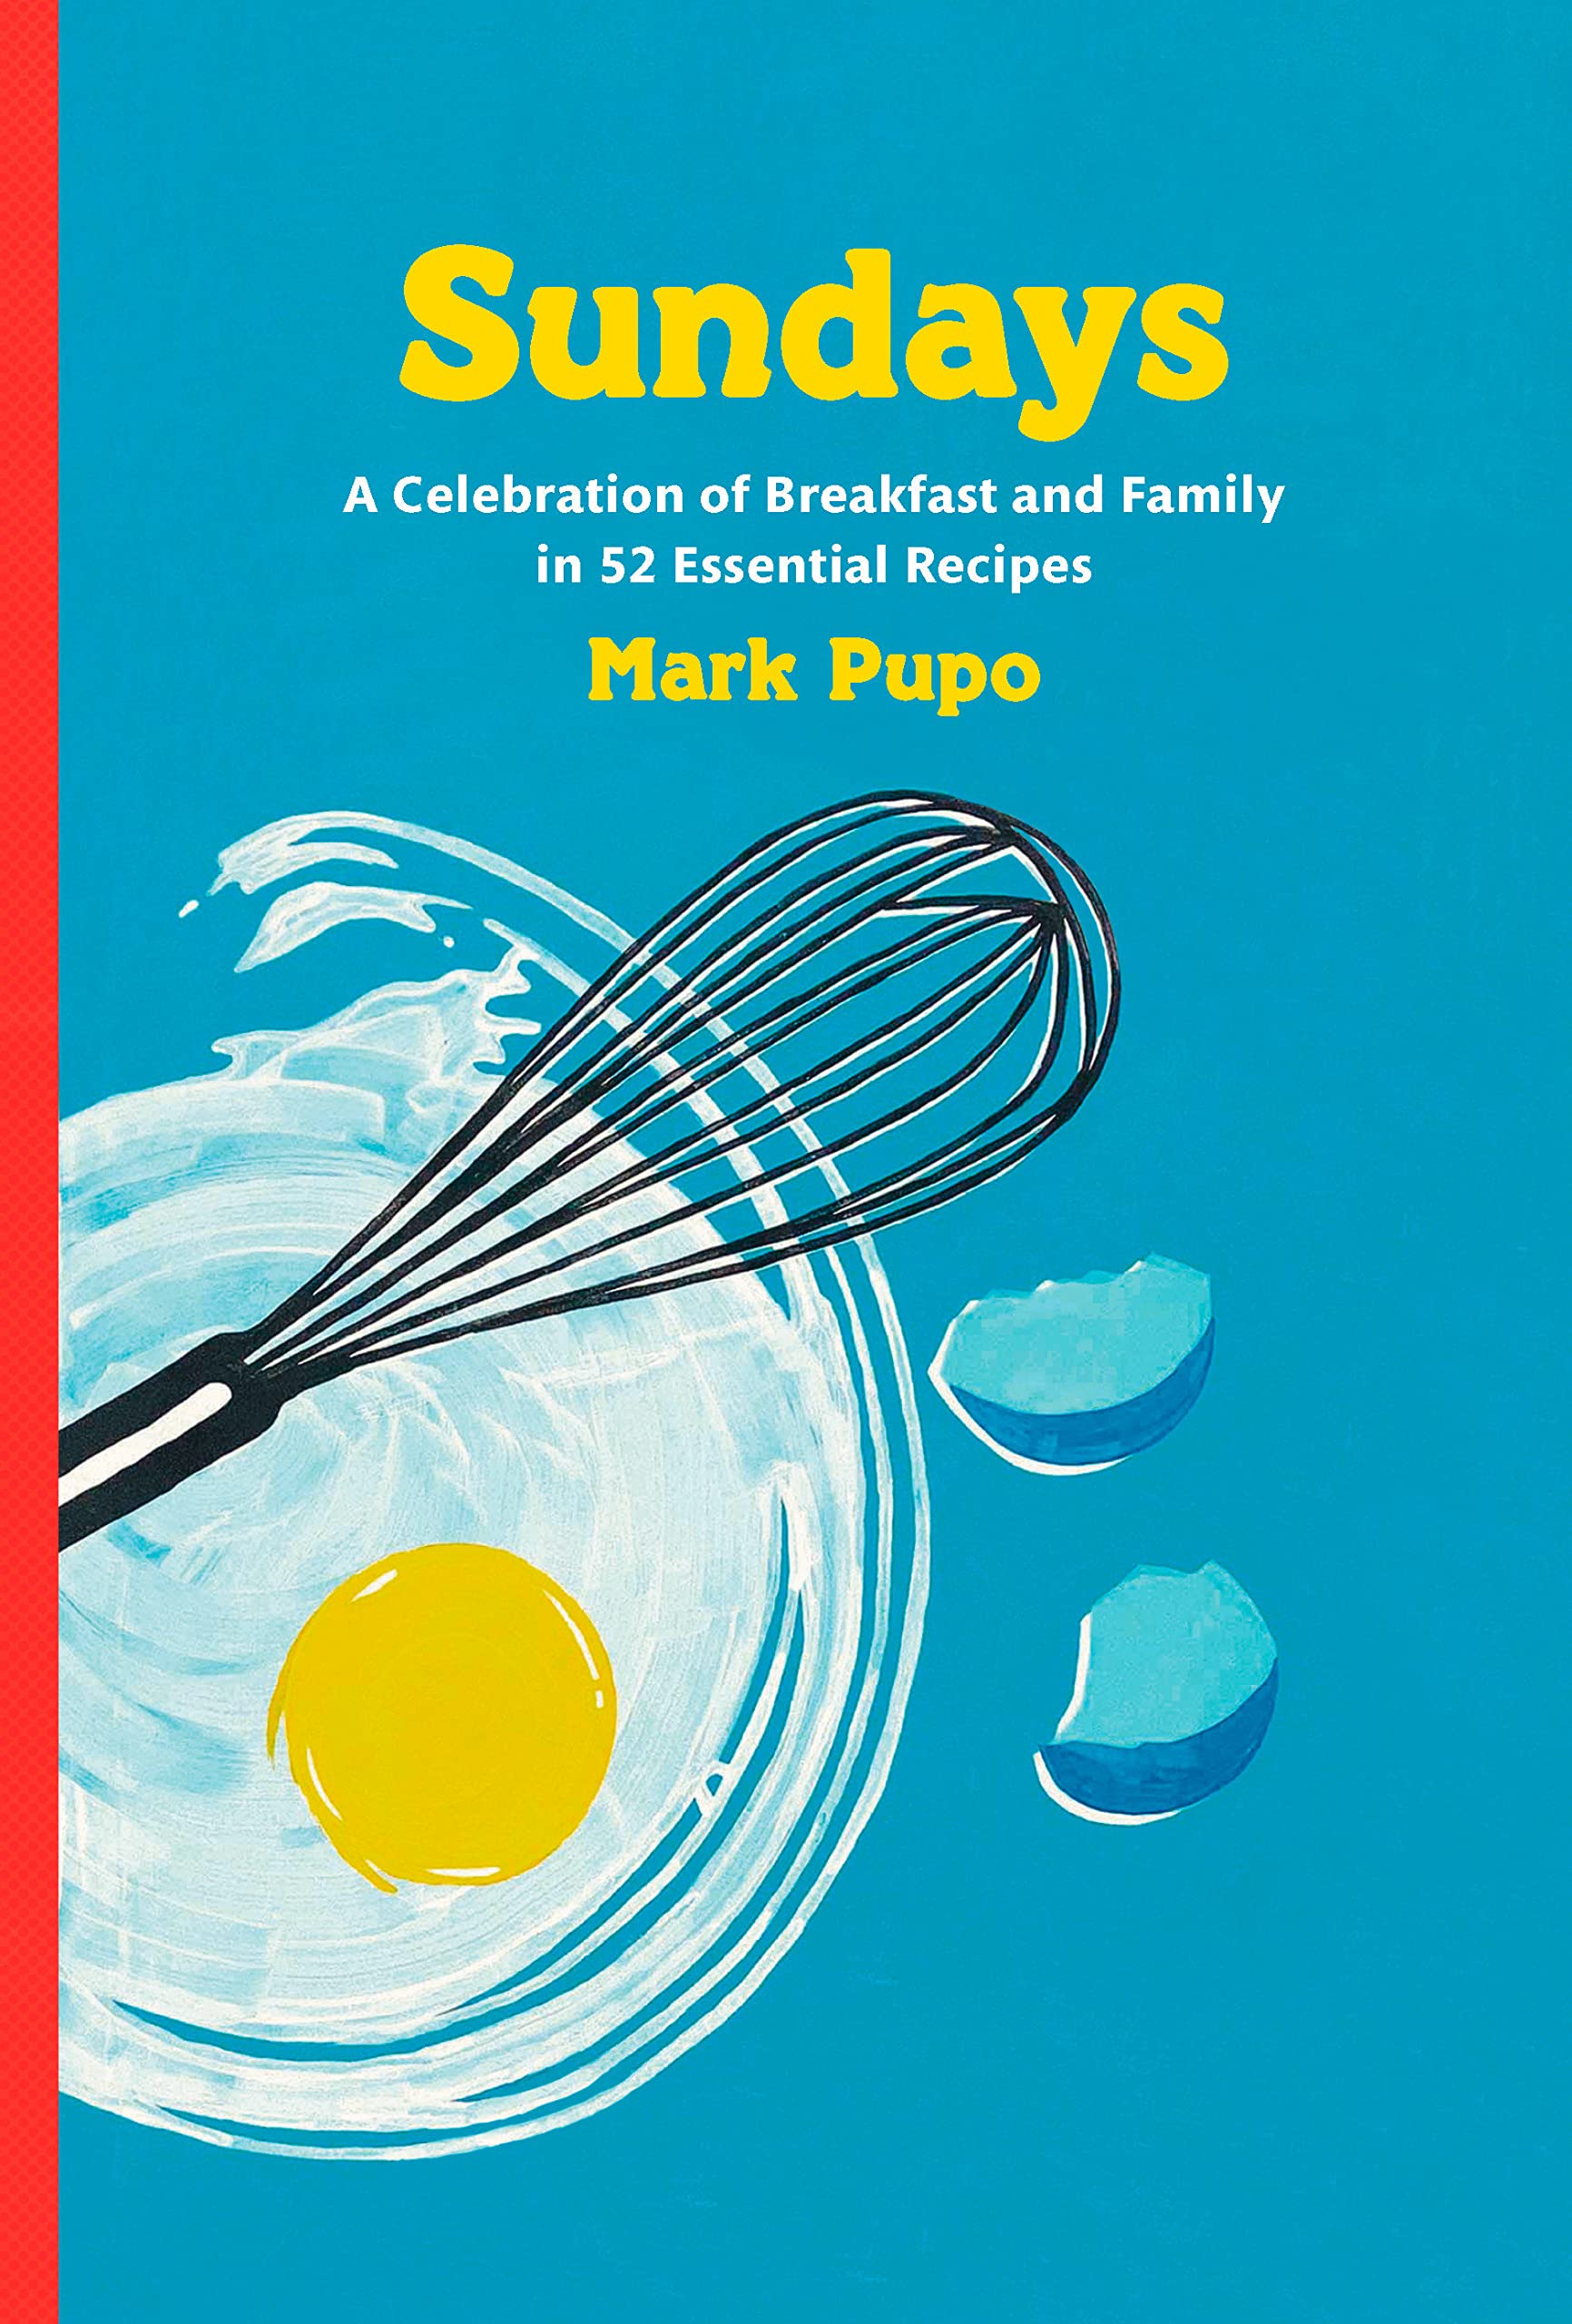 Sundays: A Celebration of Breakfast and Family in 52 Essential Recipes (Mark Pupo)